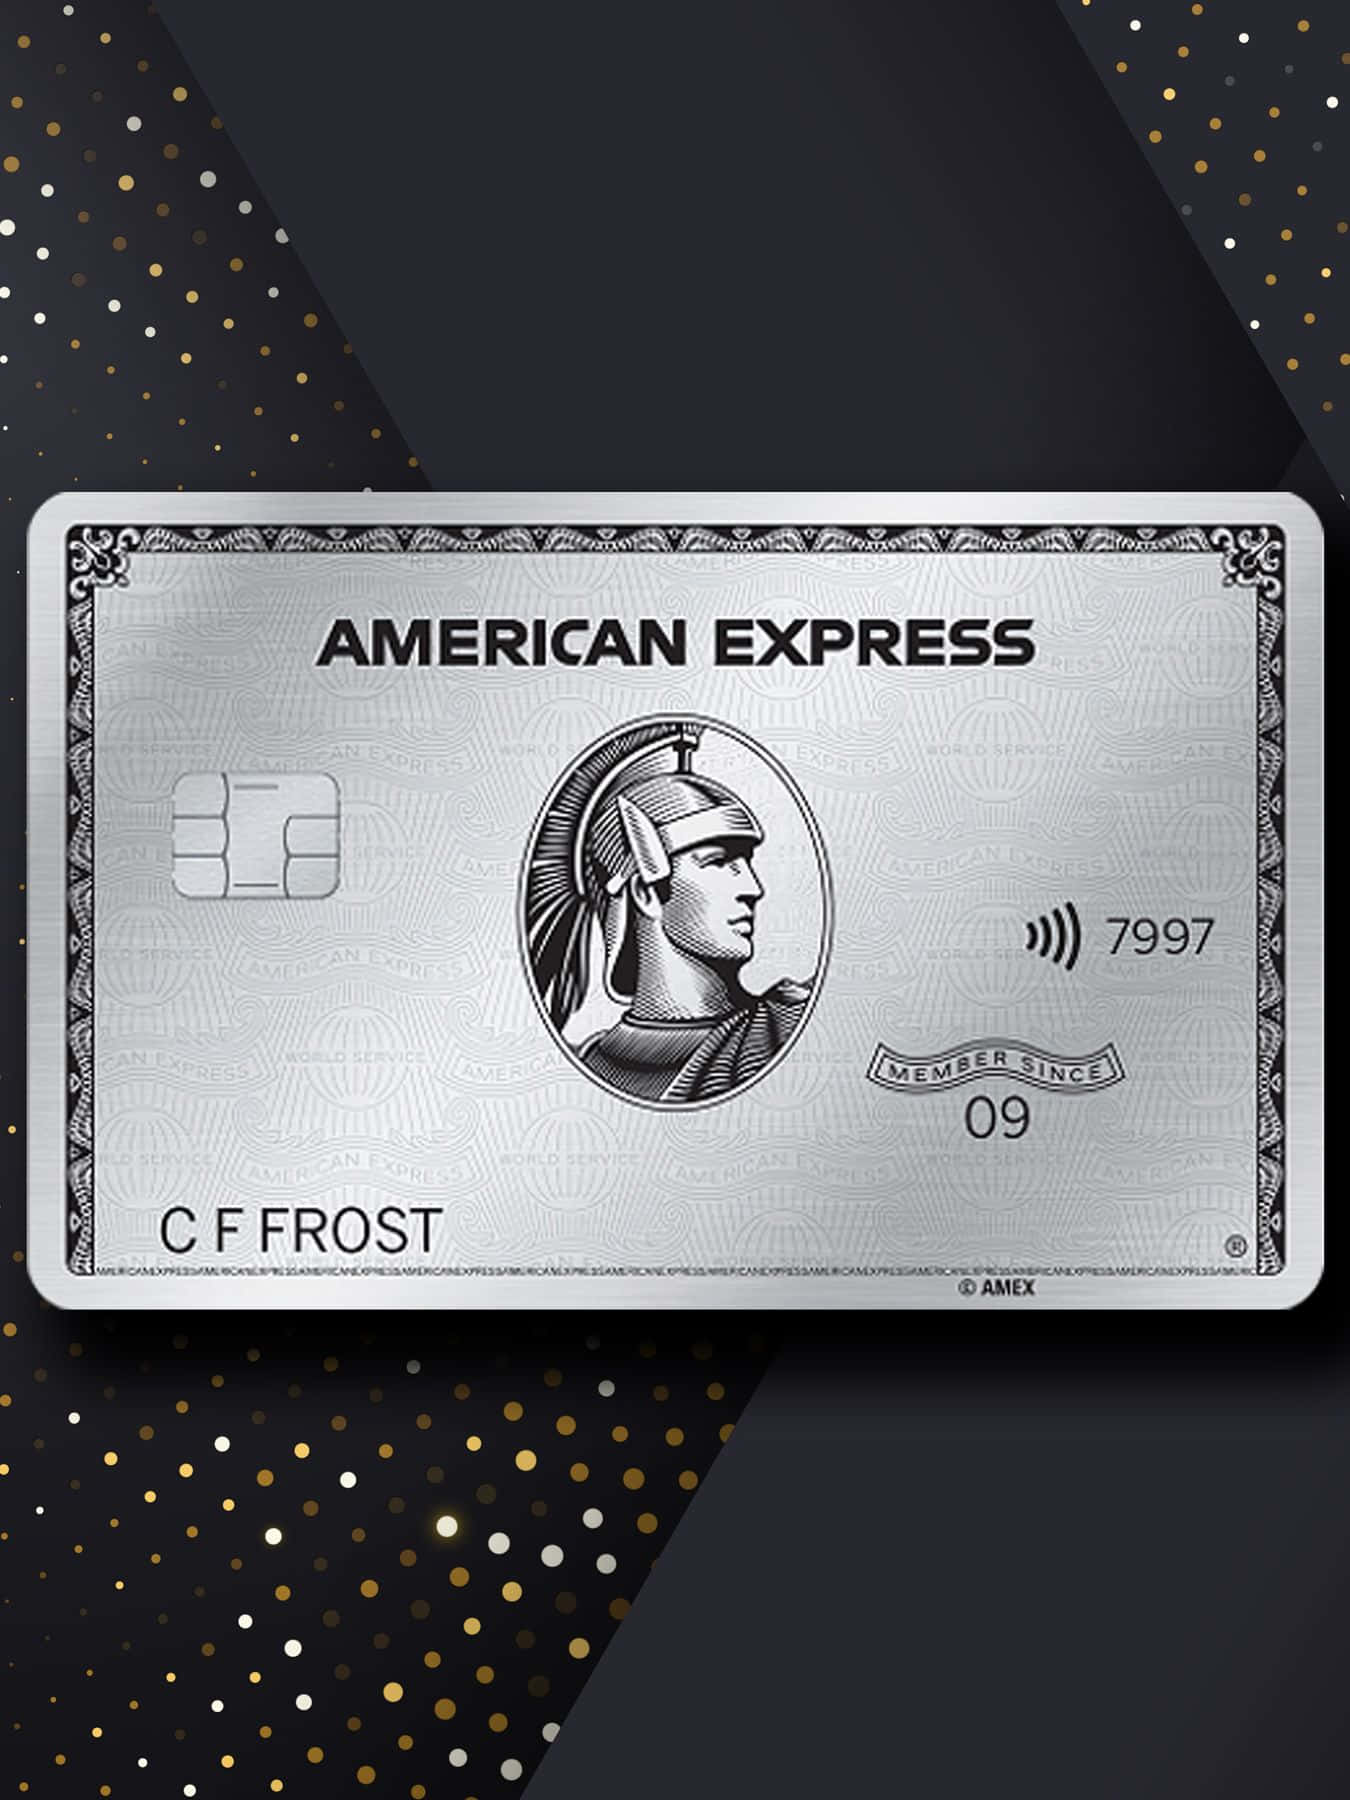 Experience the advantages of American Express